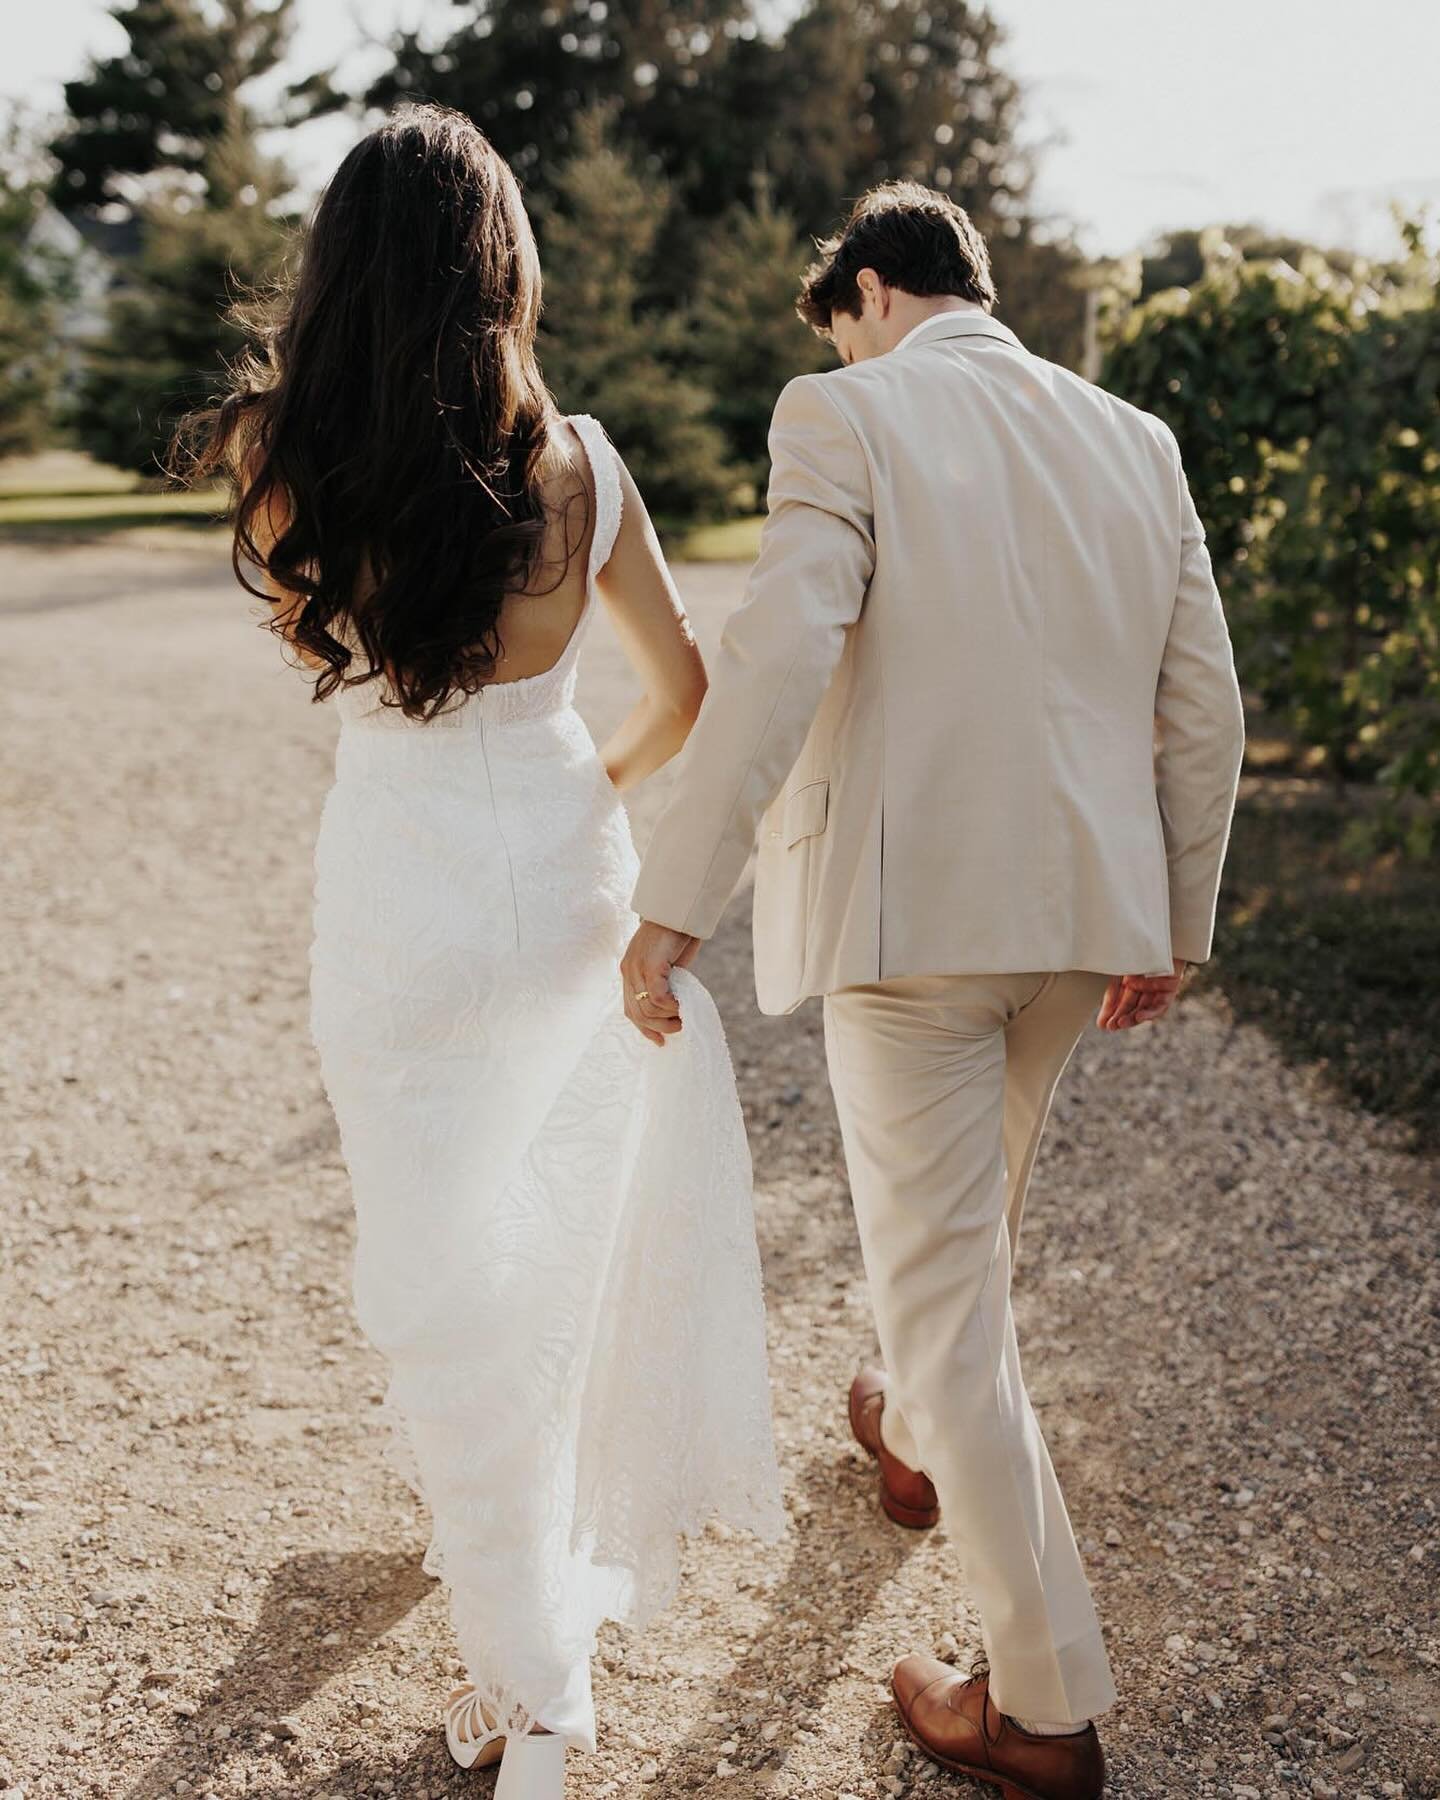 gathering all the rustic wedding inspiration from #aandbabe @gracemnewell &amp; @pboogie13&rsquo;s charming farm wedding in scandia, minnesota. &hearts;

grace glistened in @alenaleenabridal &lsquo;calathea&rsquo; dress. this bridal gown&rsquo;s orga